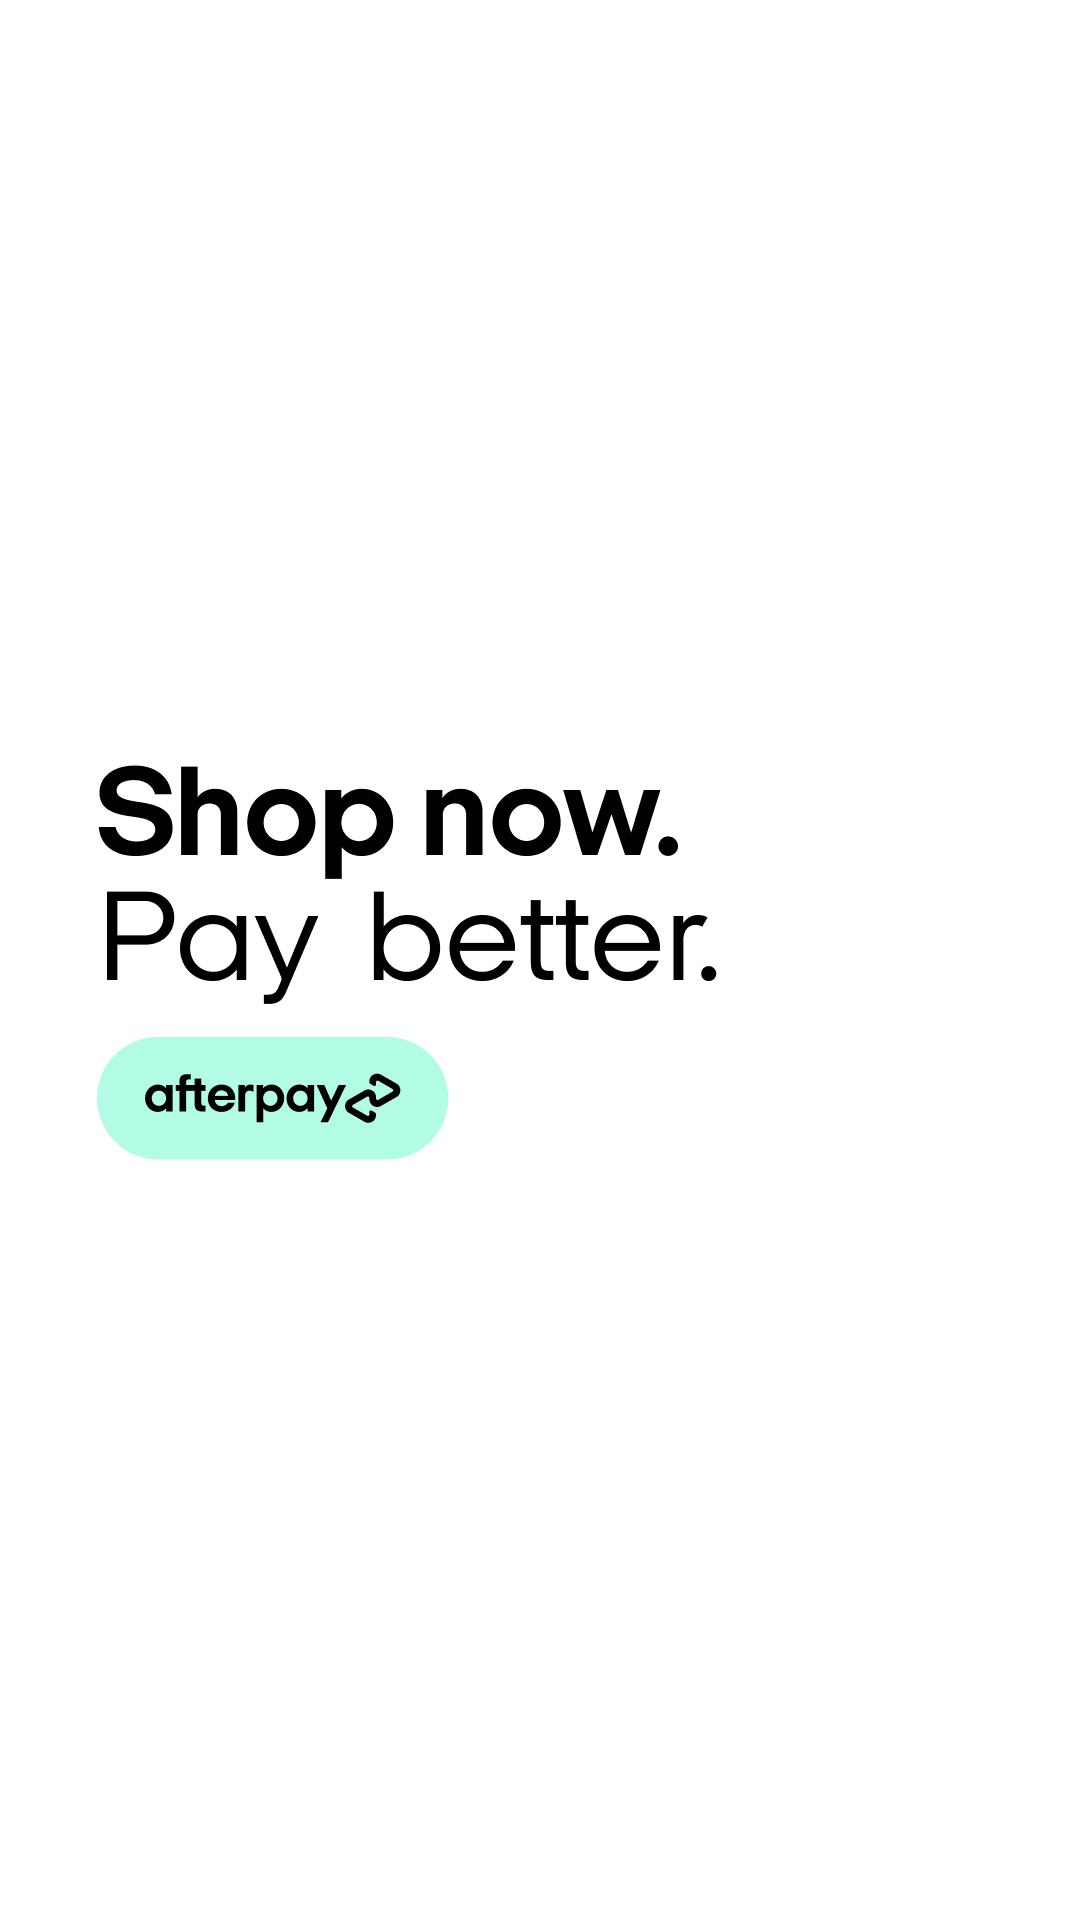 Marketing resources center - Social Media - Launch Afterpay